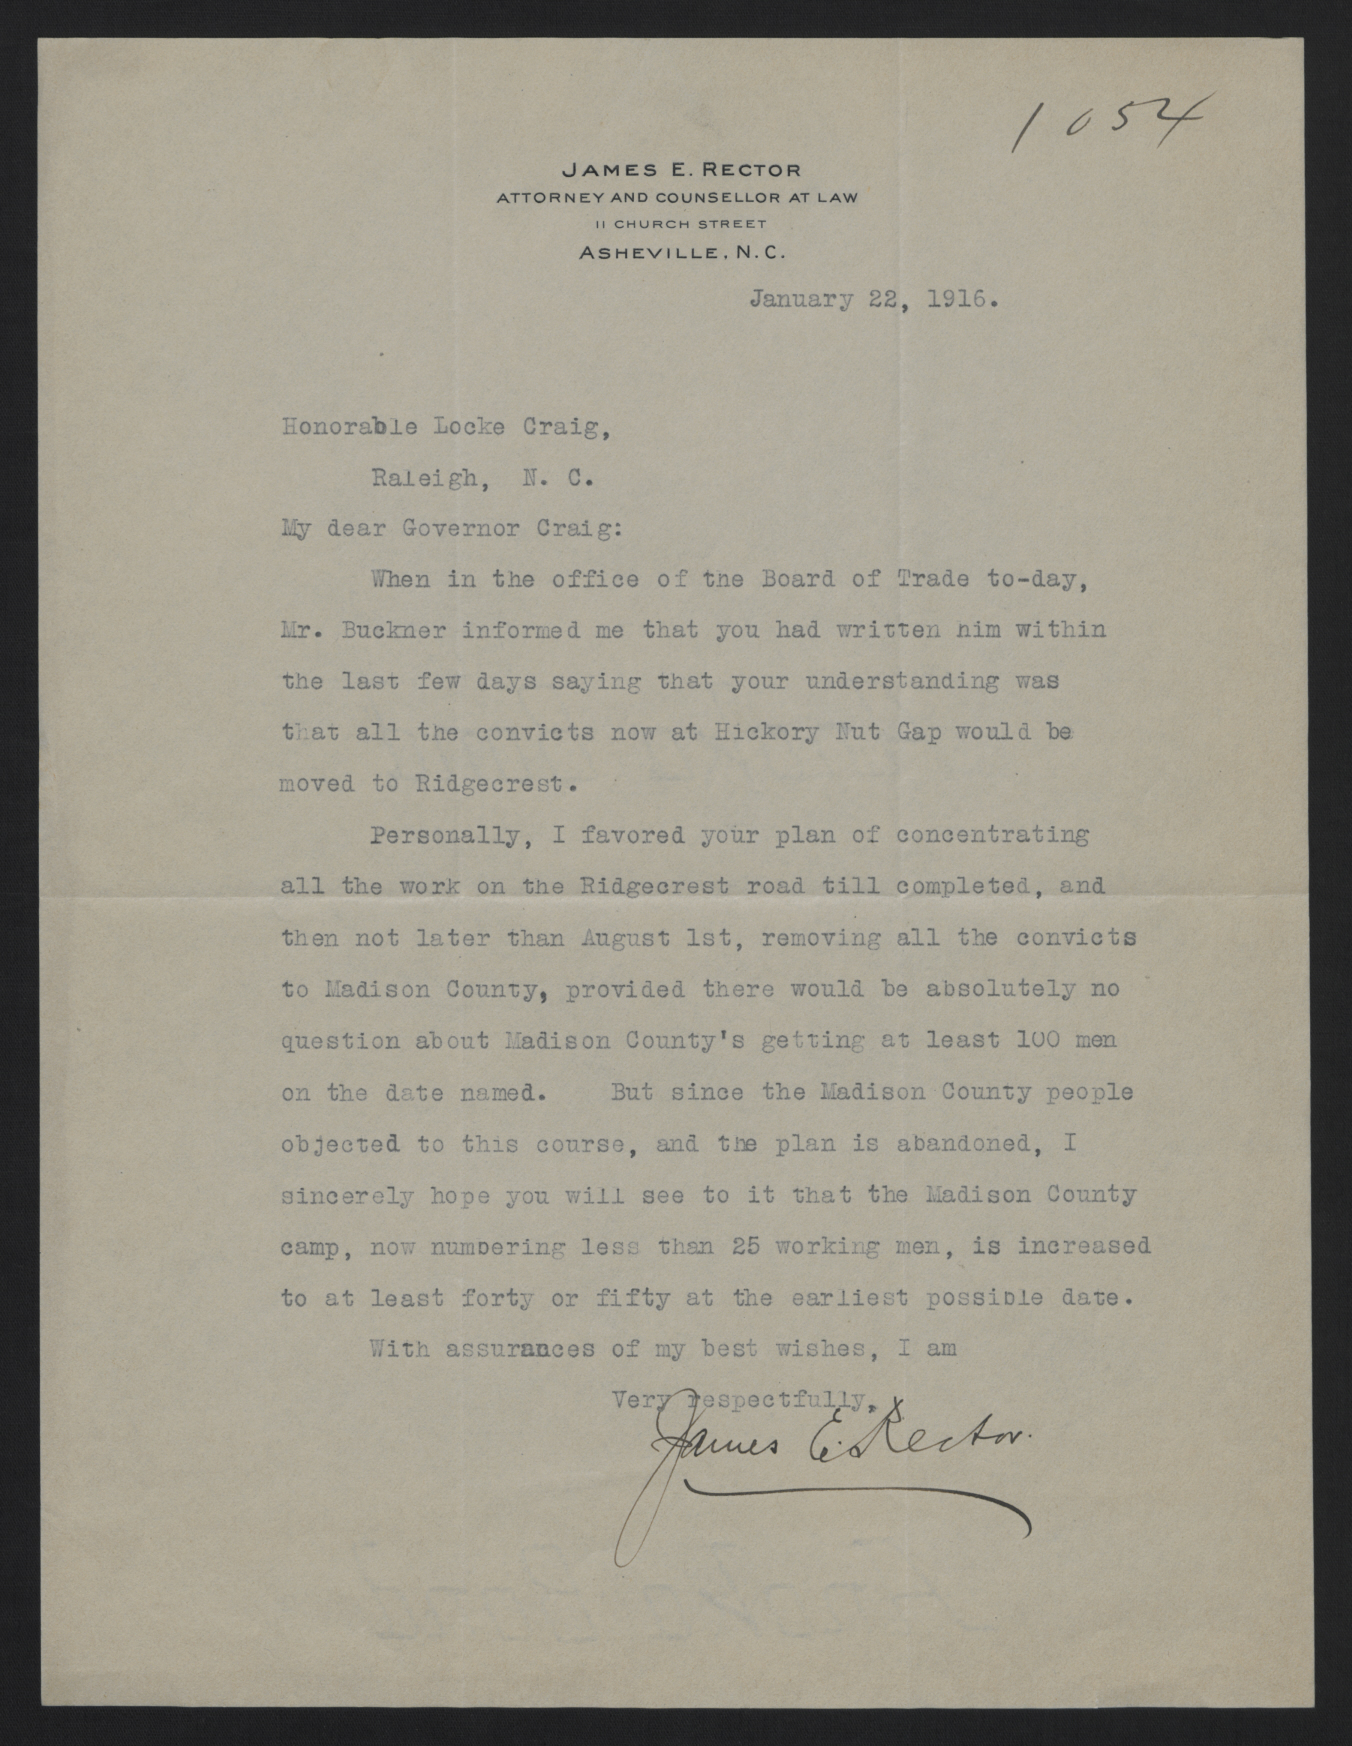 Letter from Rector to Craig, January 22, 1916